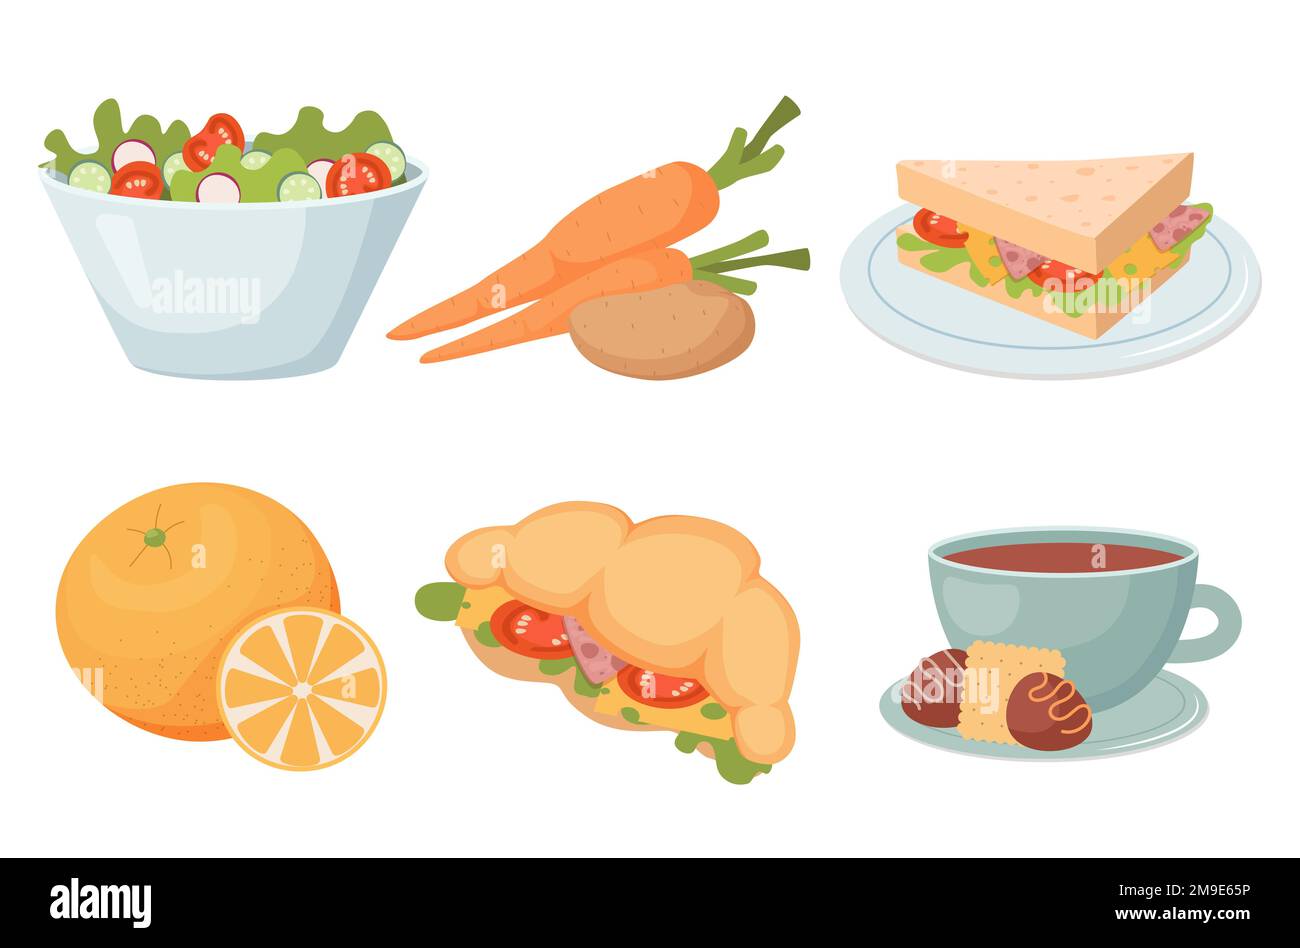 set of products sandwich croissant with ham cheese and tomatoes a cup of coffee with sweets orange vegetables and a bowl of salad Stock Vector